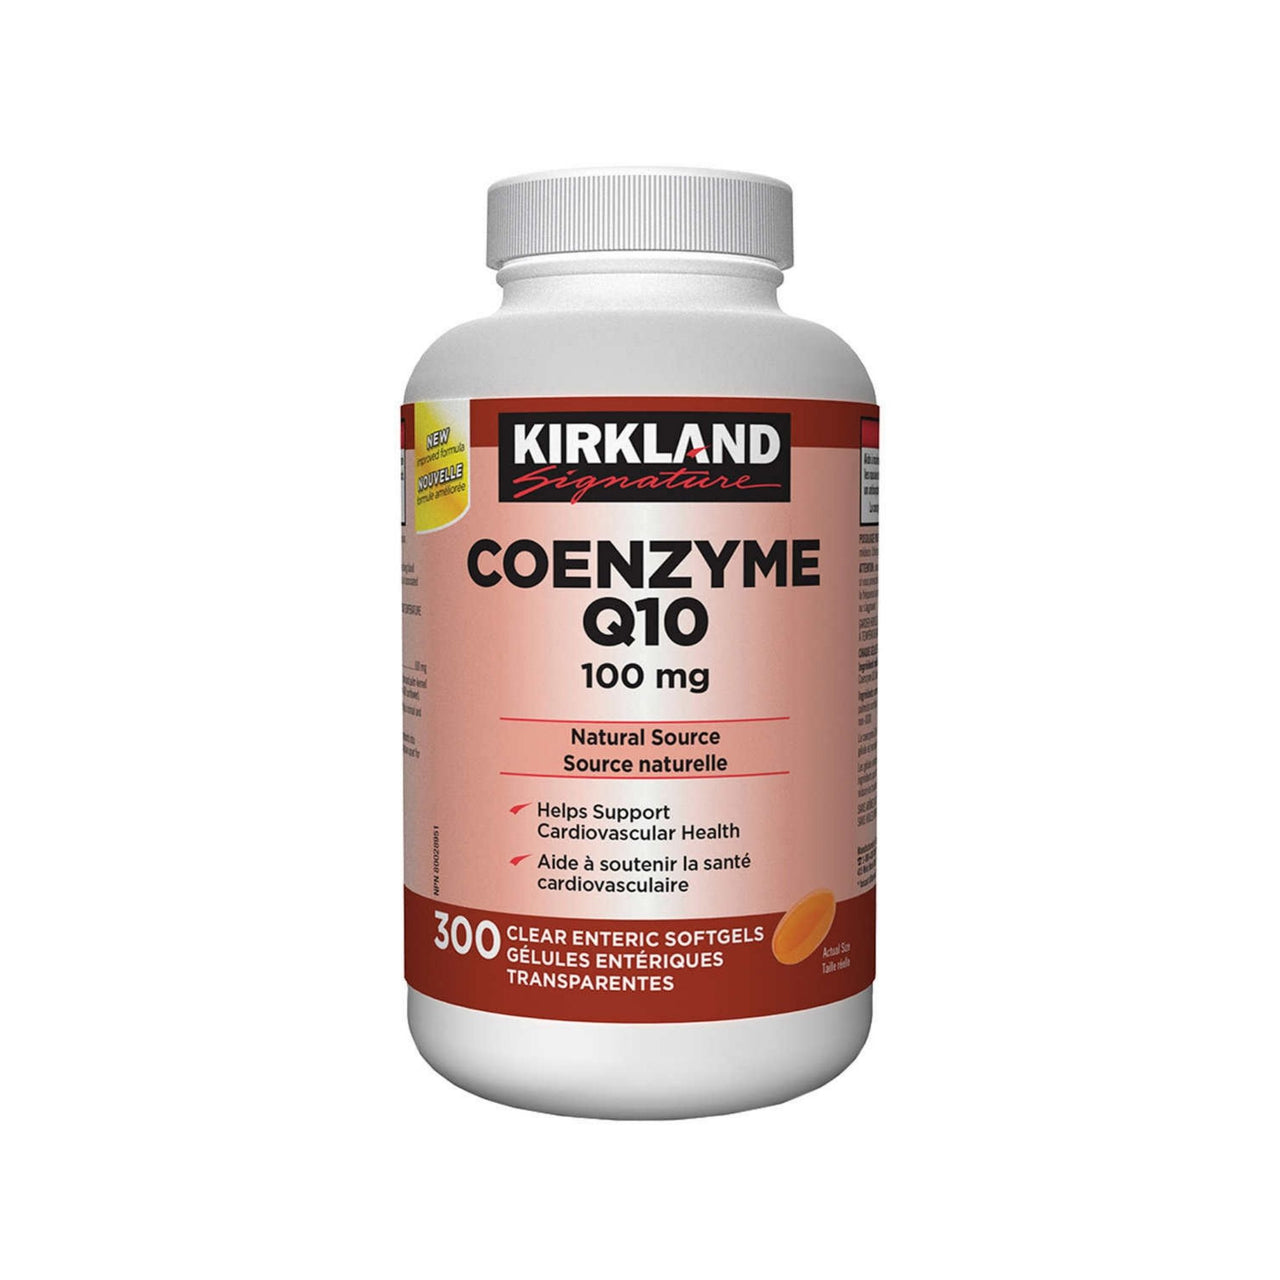 Image of Kirkland Signature Coenzyme Q10 100 mg, 300 Clear Enteric Softgels